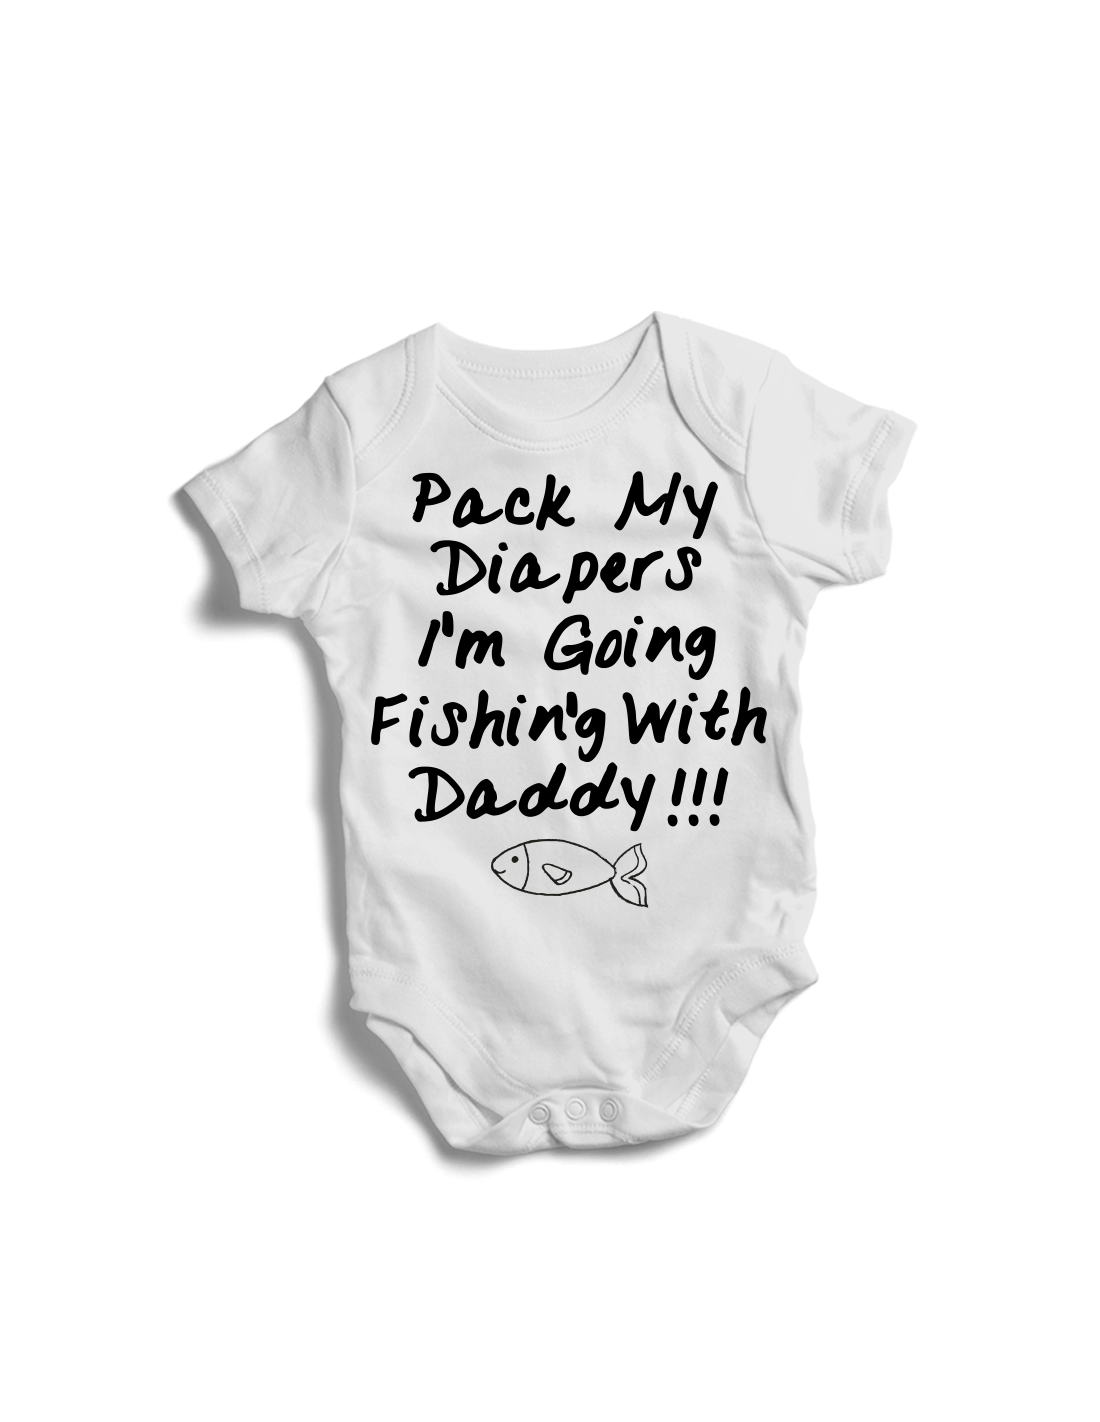 Pack my diapers, I'm going fishing with daddy!!! Baby onesie. Size